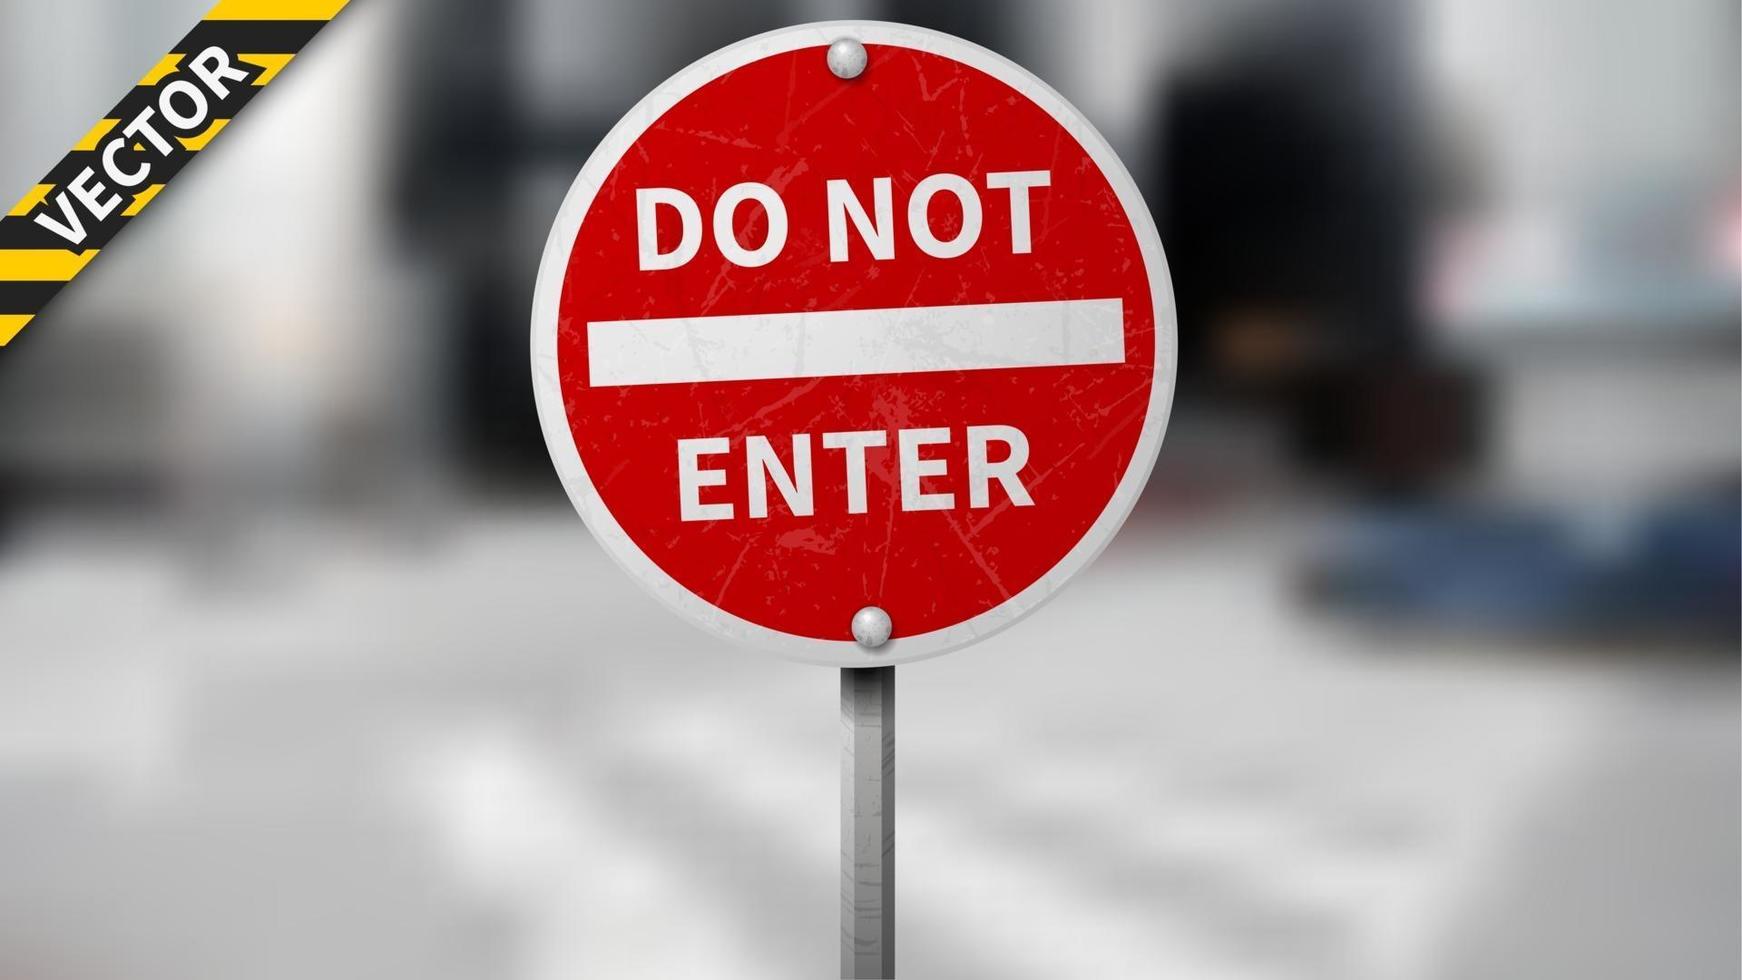 Do Not Enter traffic sign, red road sign on blurred traffic background, isolated and easy to edit. Vector Illustration